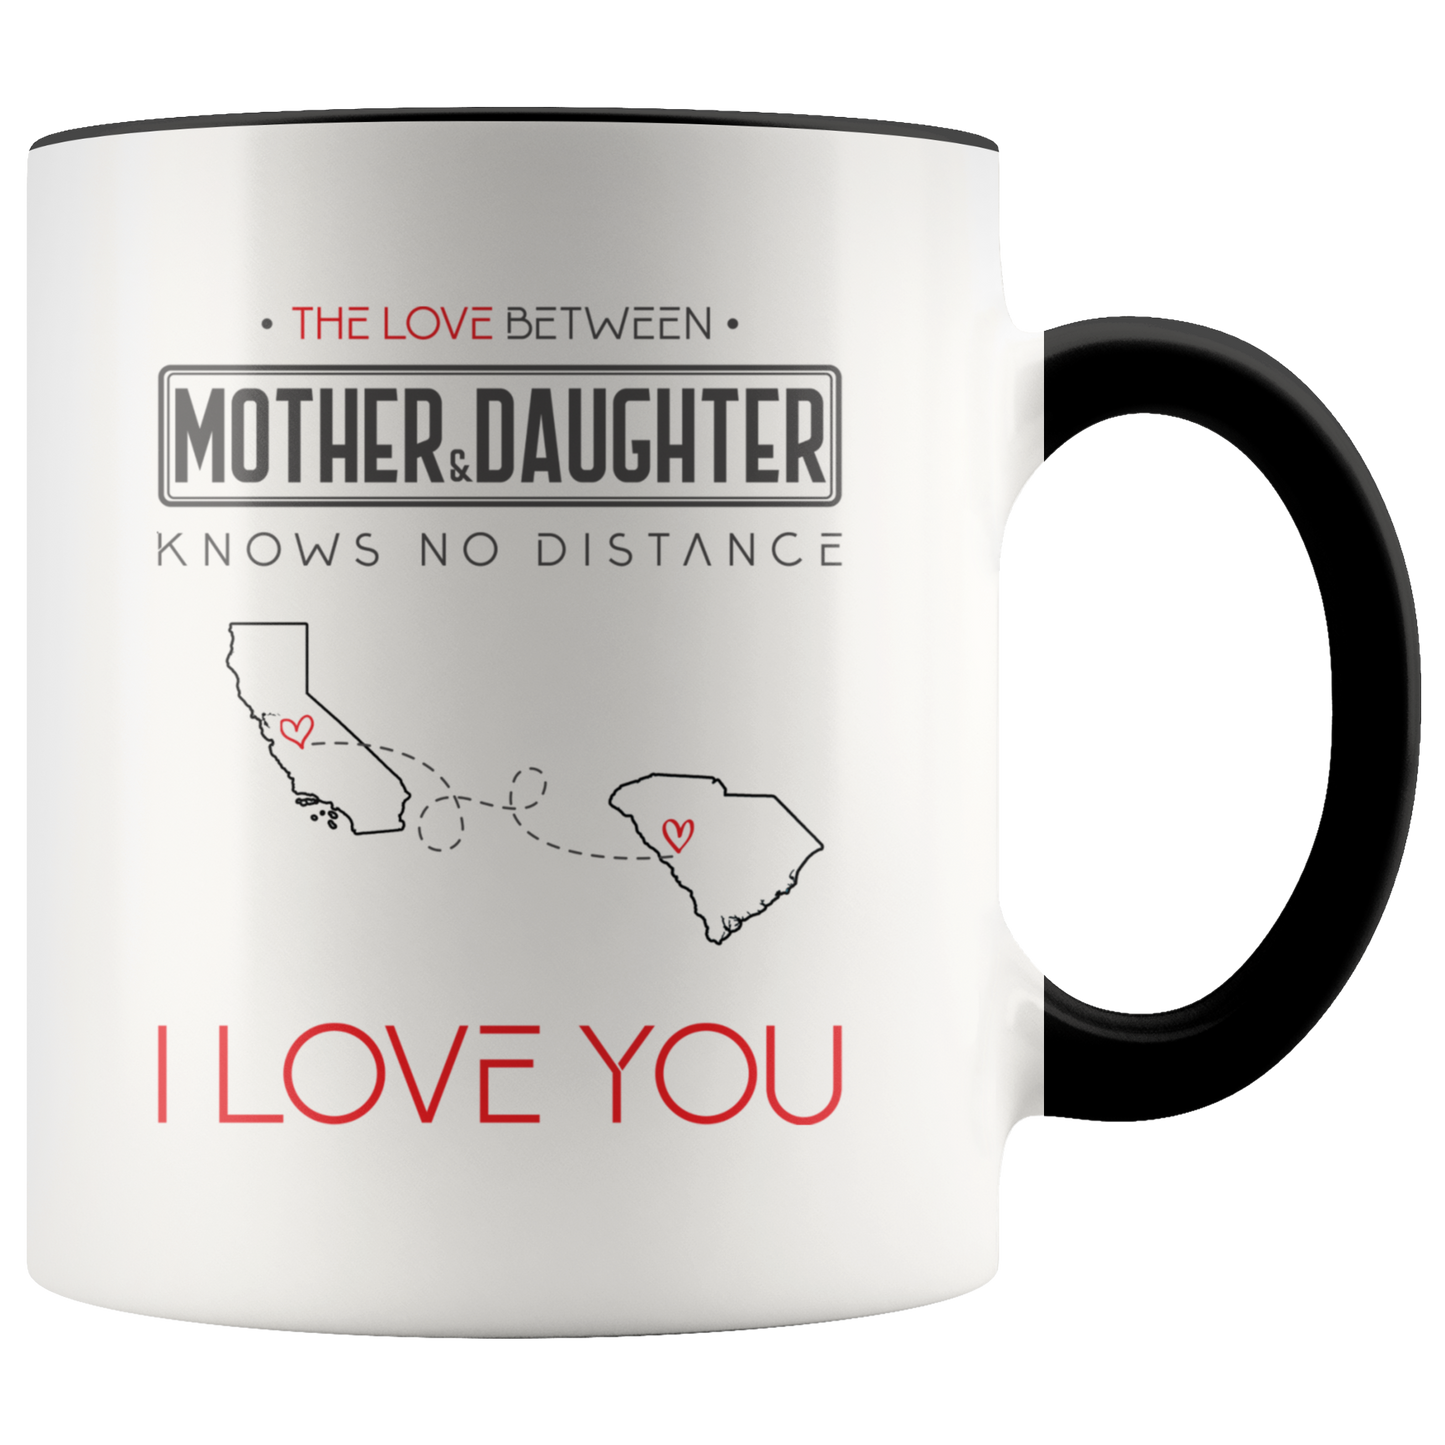 ND-21313785-sp-24079 - [ California | South Carolina ]Mom And Daughter Accent Mug 11 oz Red - The Love Between Mot